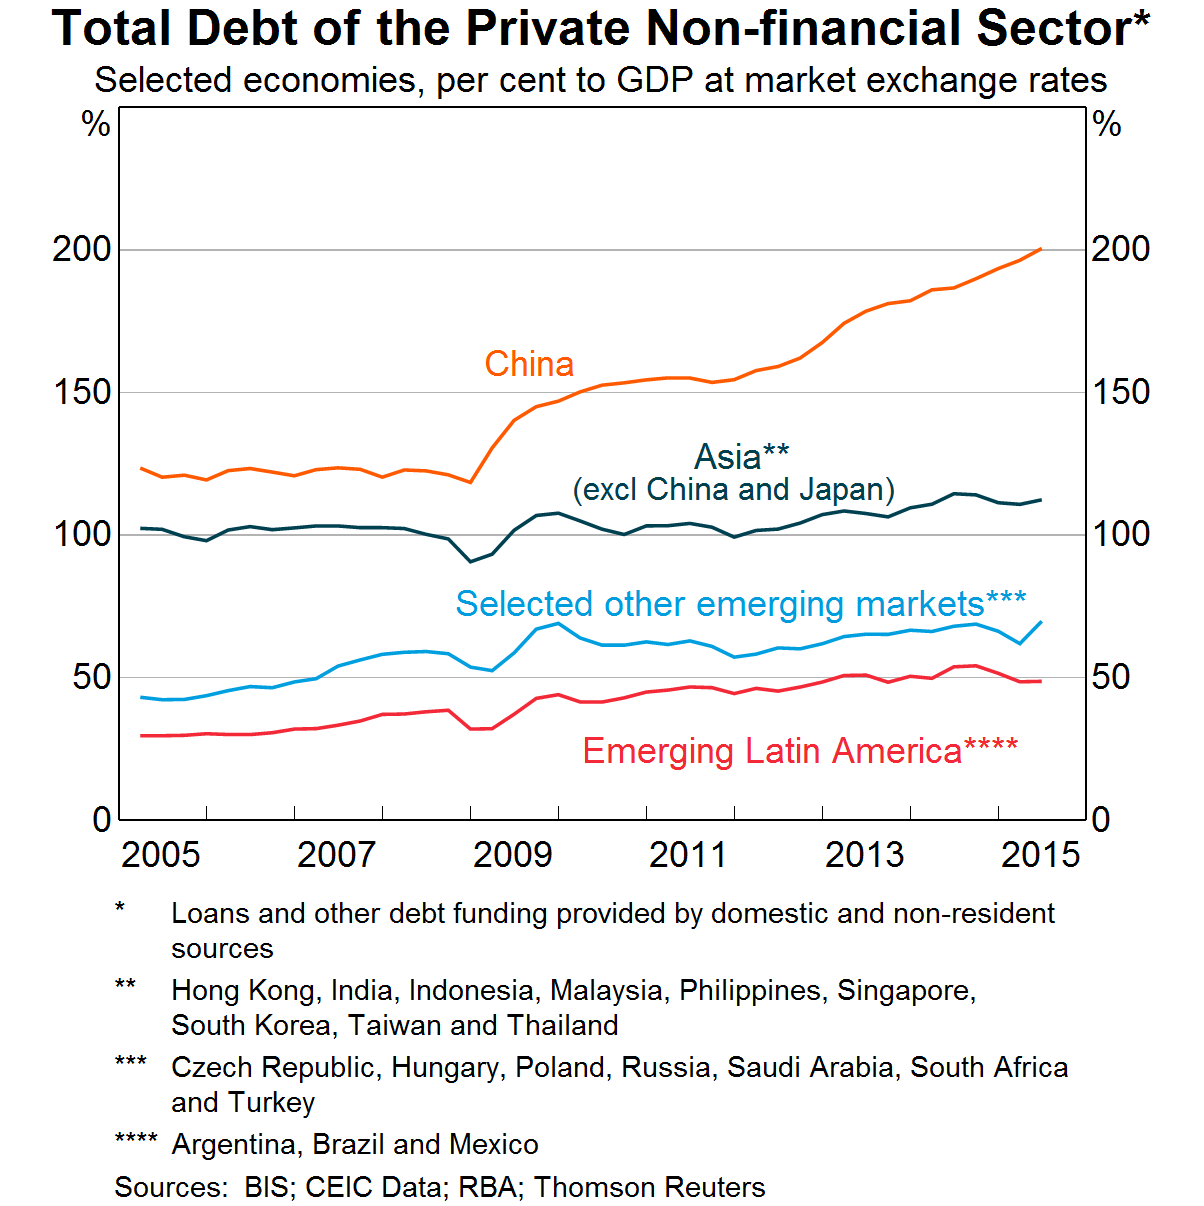 Graph 2: Total Debt of the Private Non-financial Sector